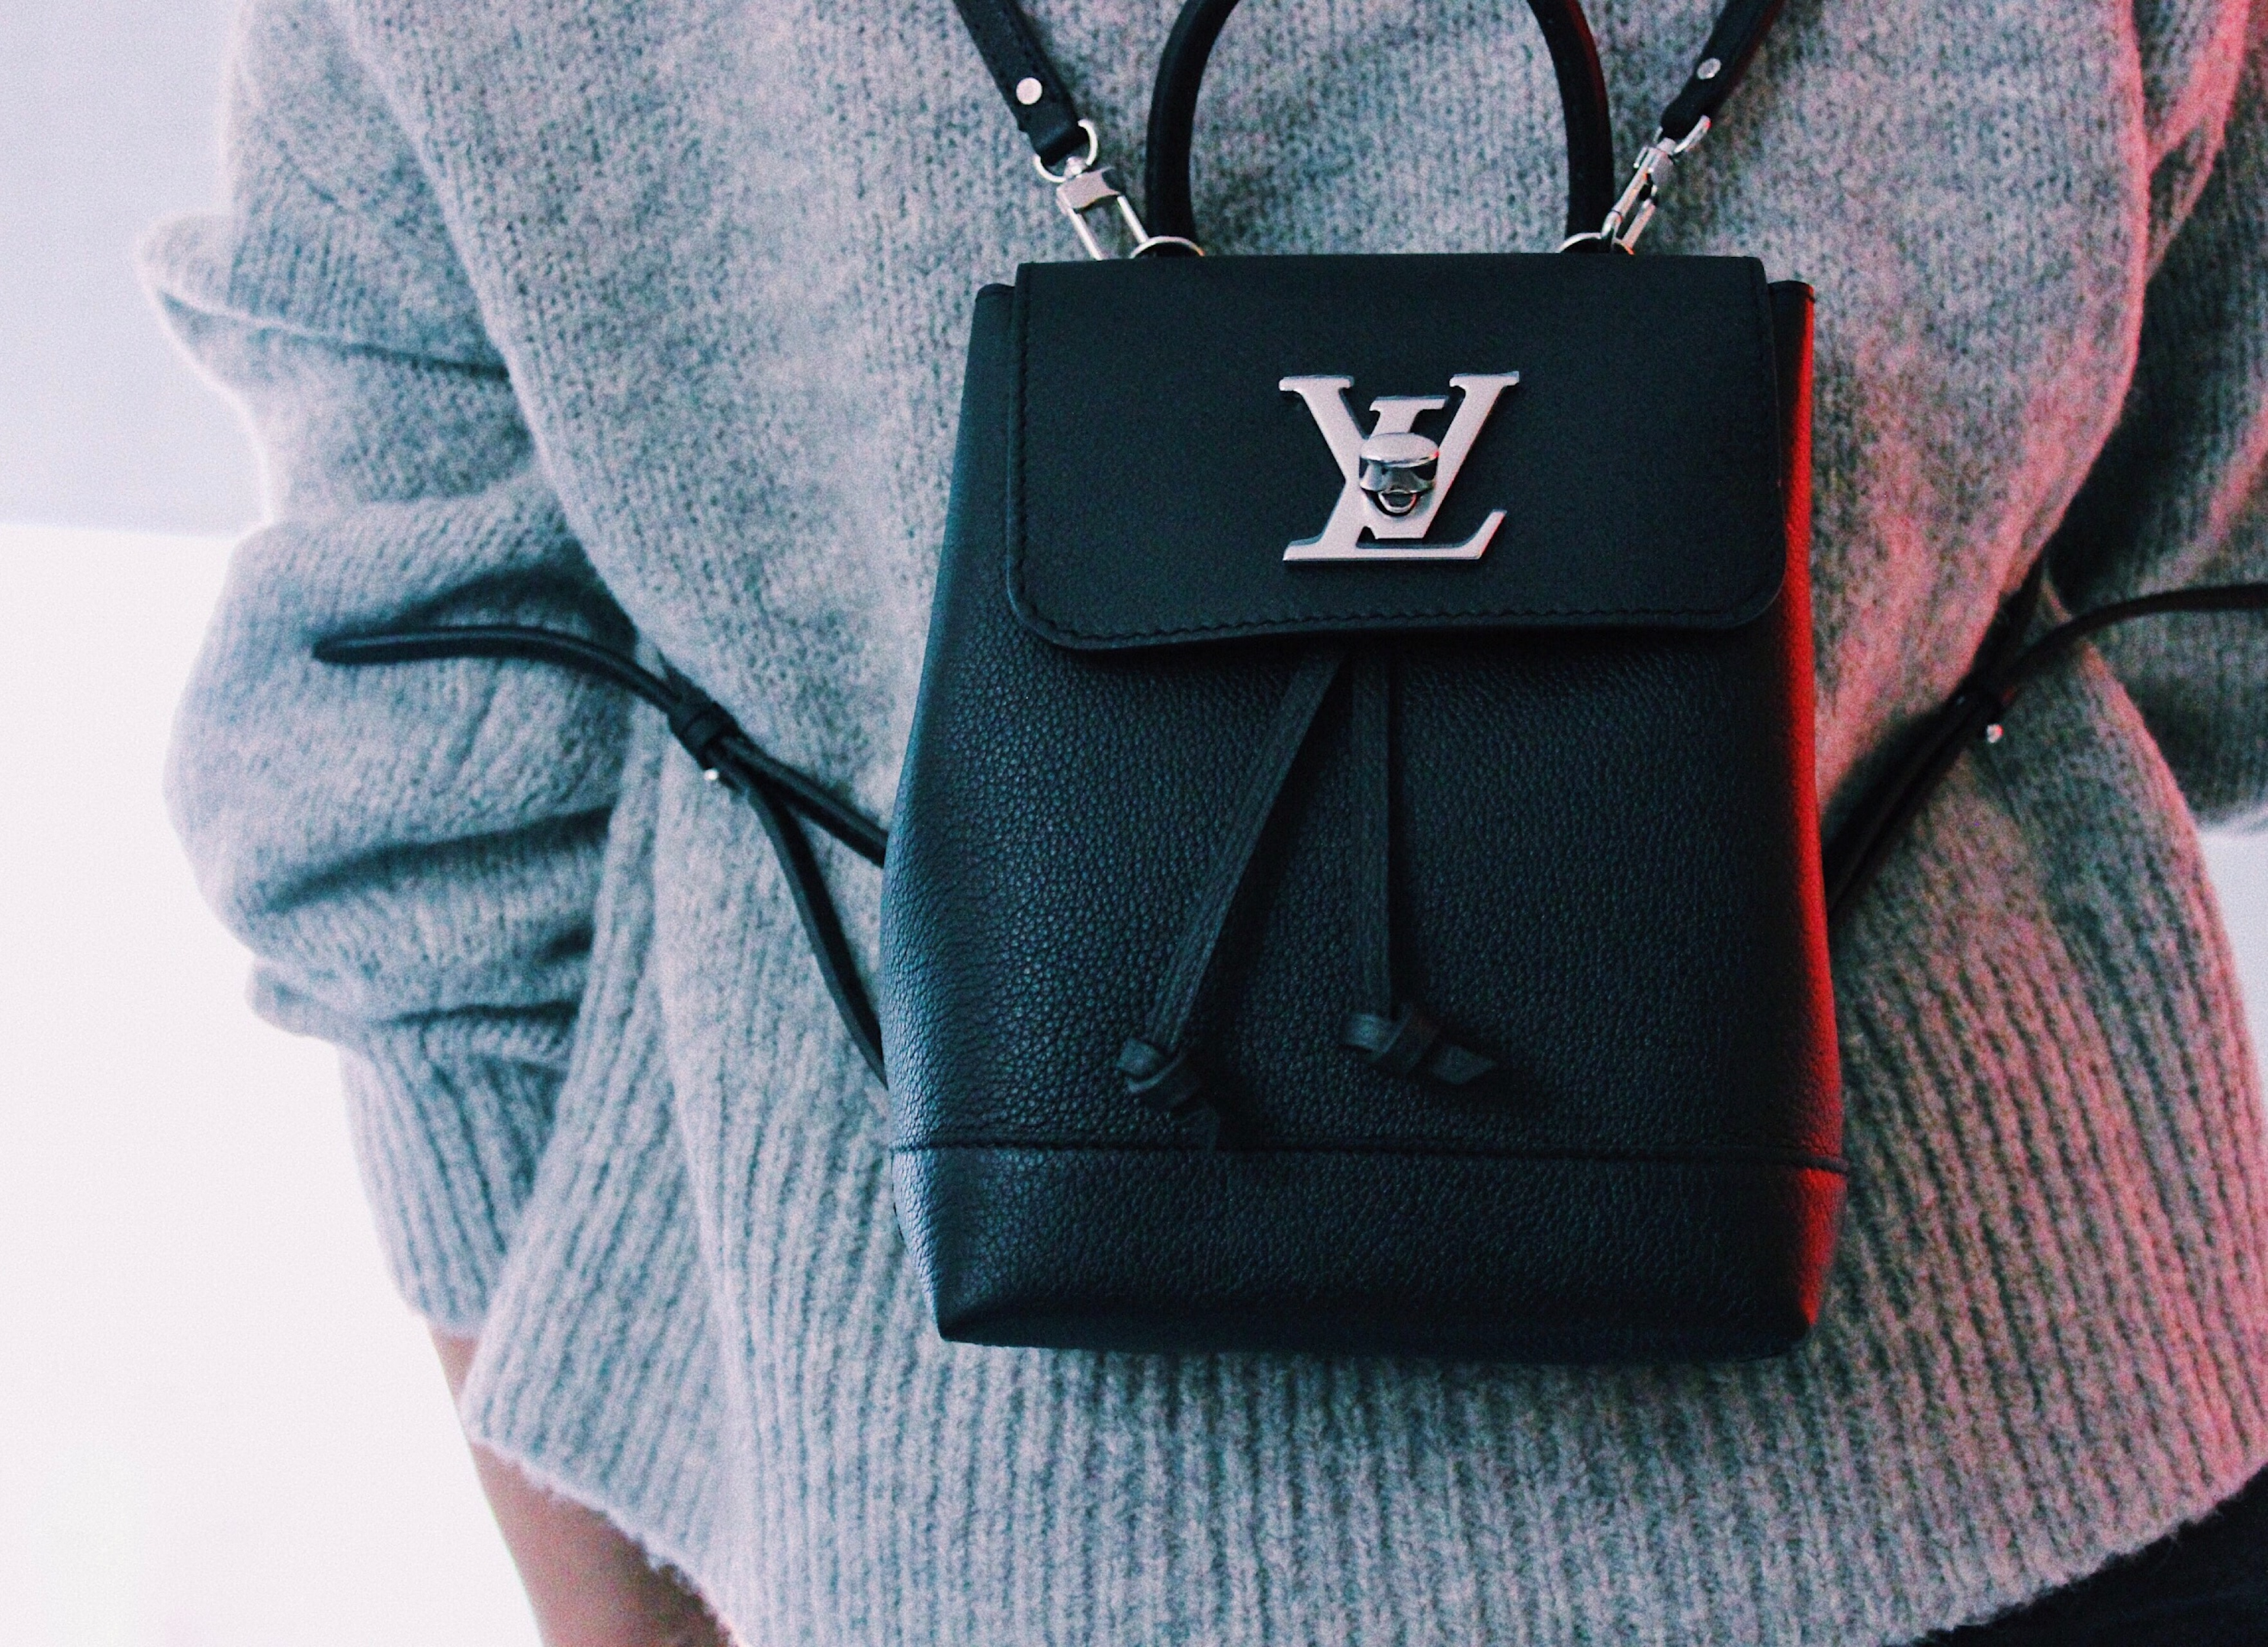 The LV monogram appears on most, if not all, of Louis Vuitton's luxury items | Photo by Jonathan J. Castellon from Pexels